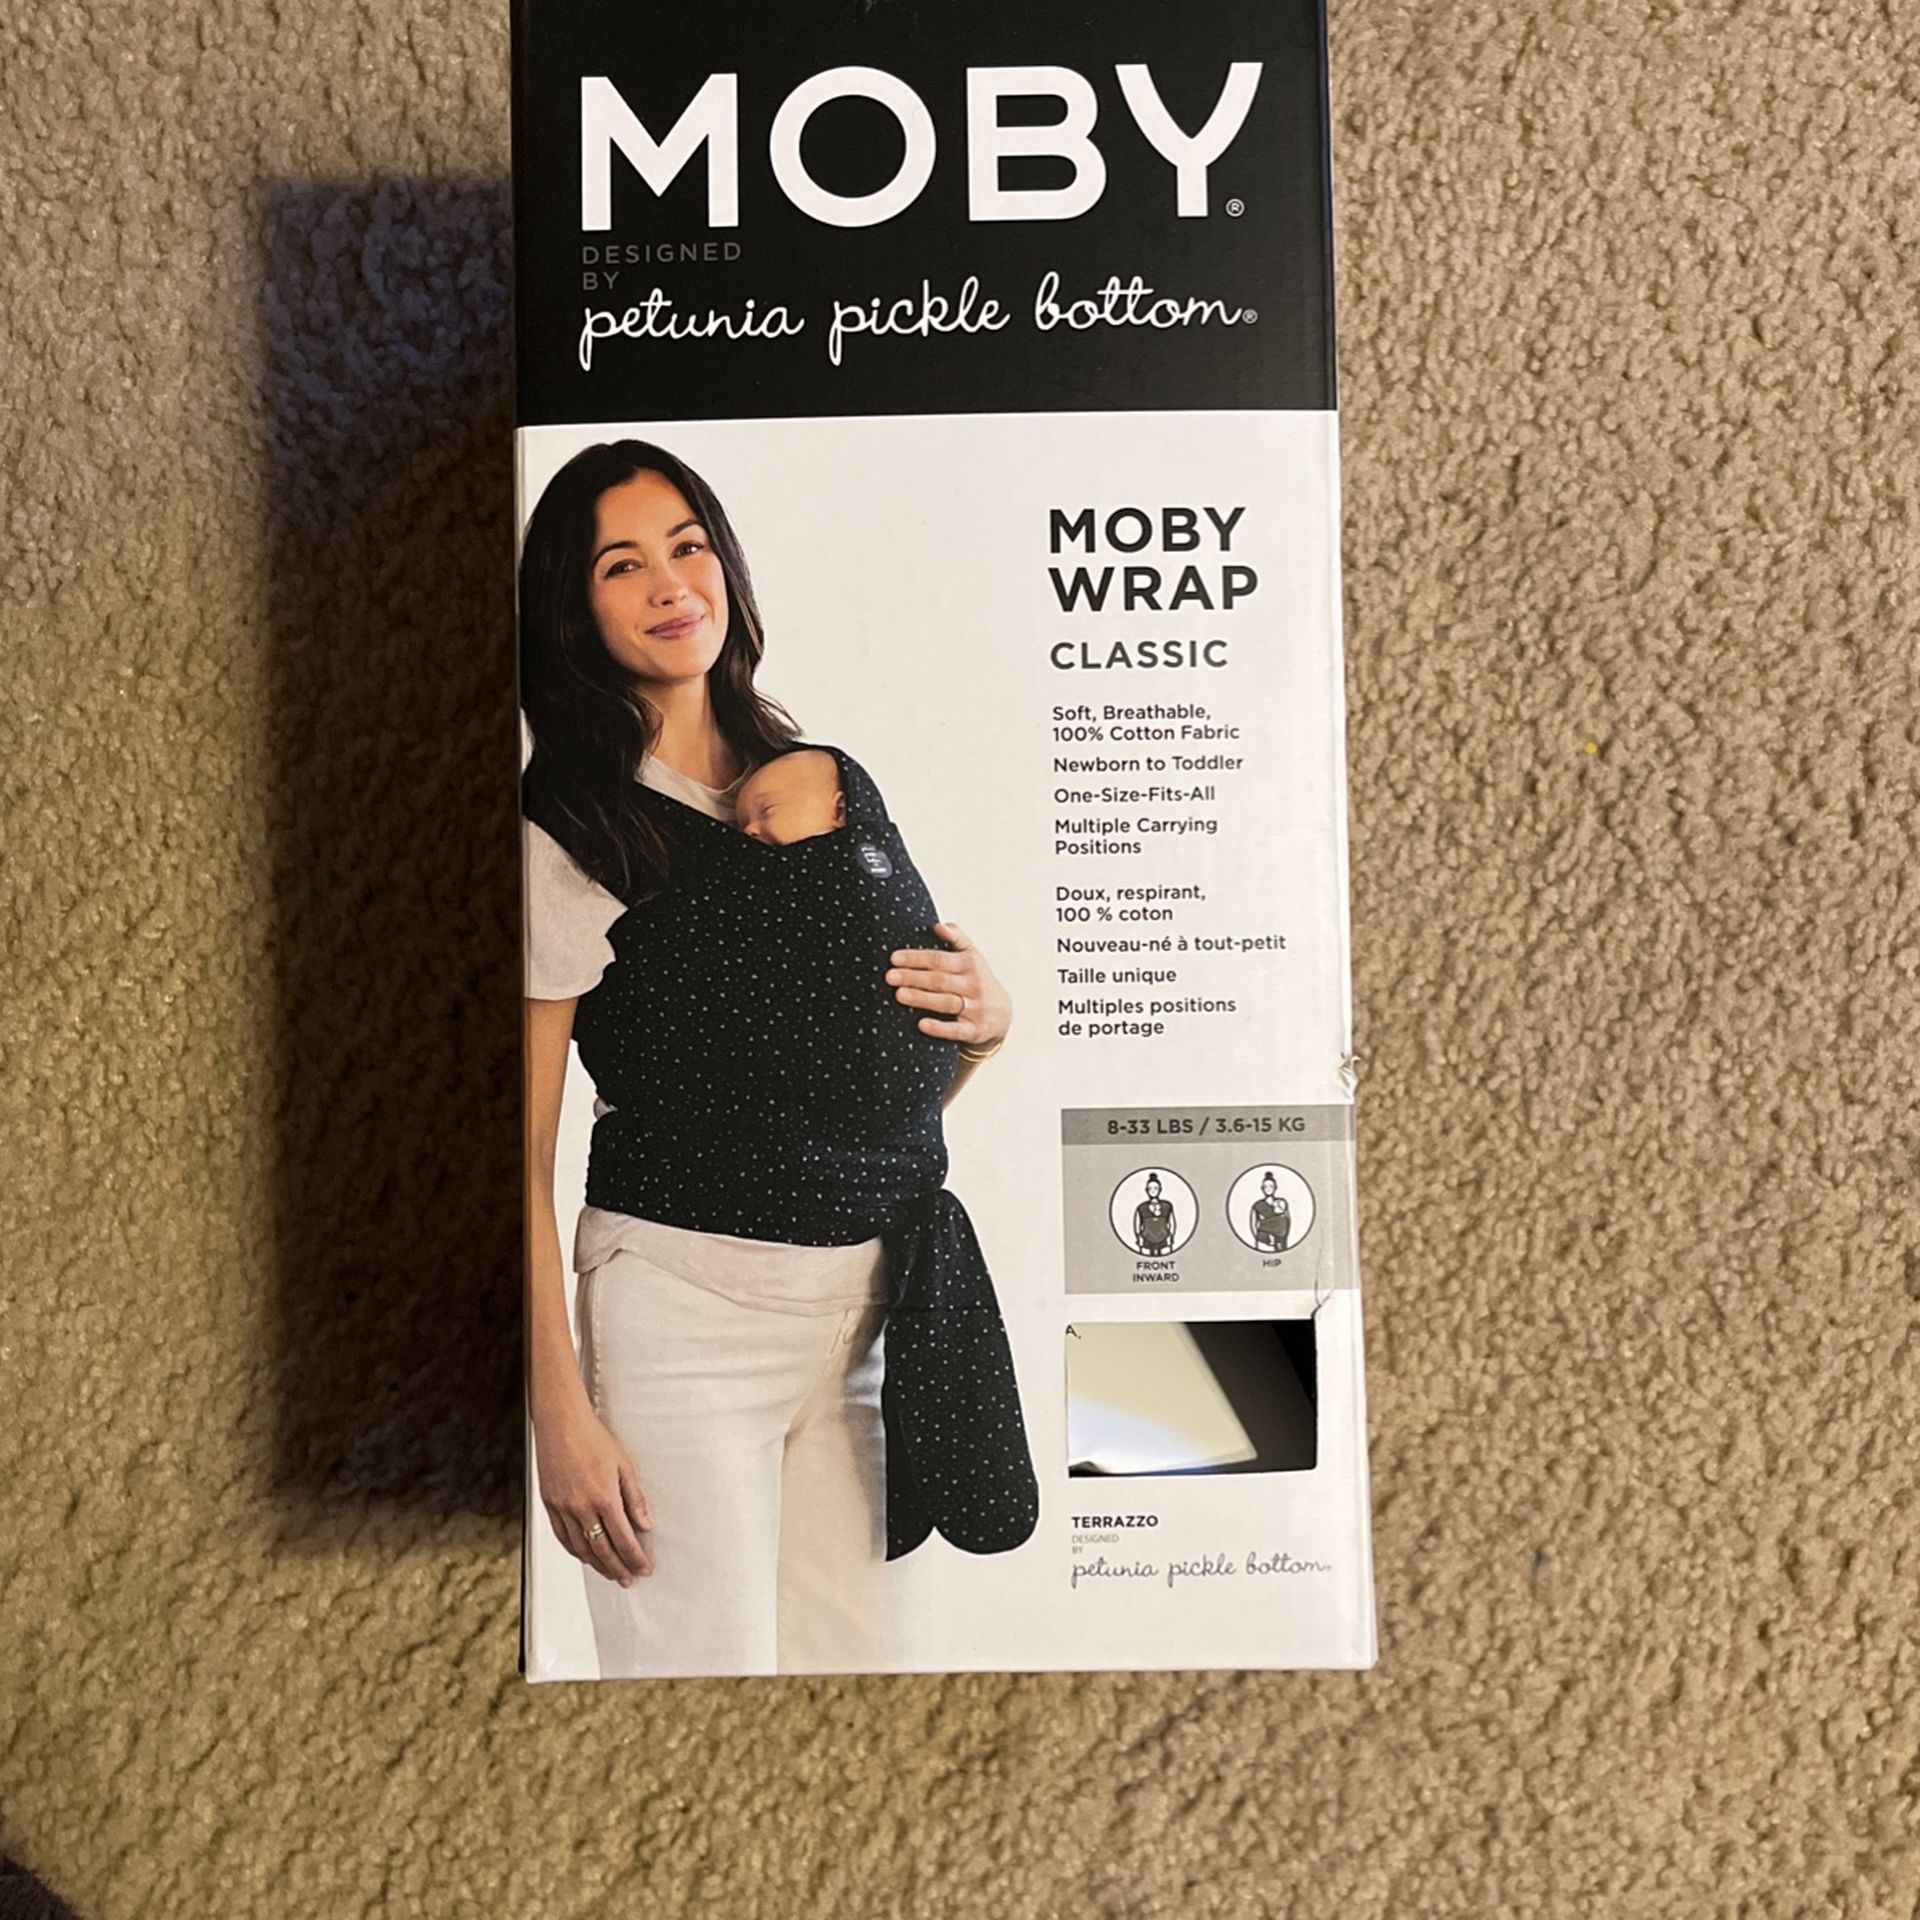 Petunia Pickle Bottom Moby  Wrap